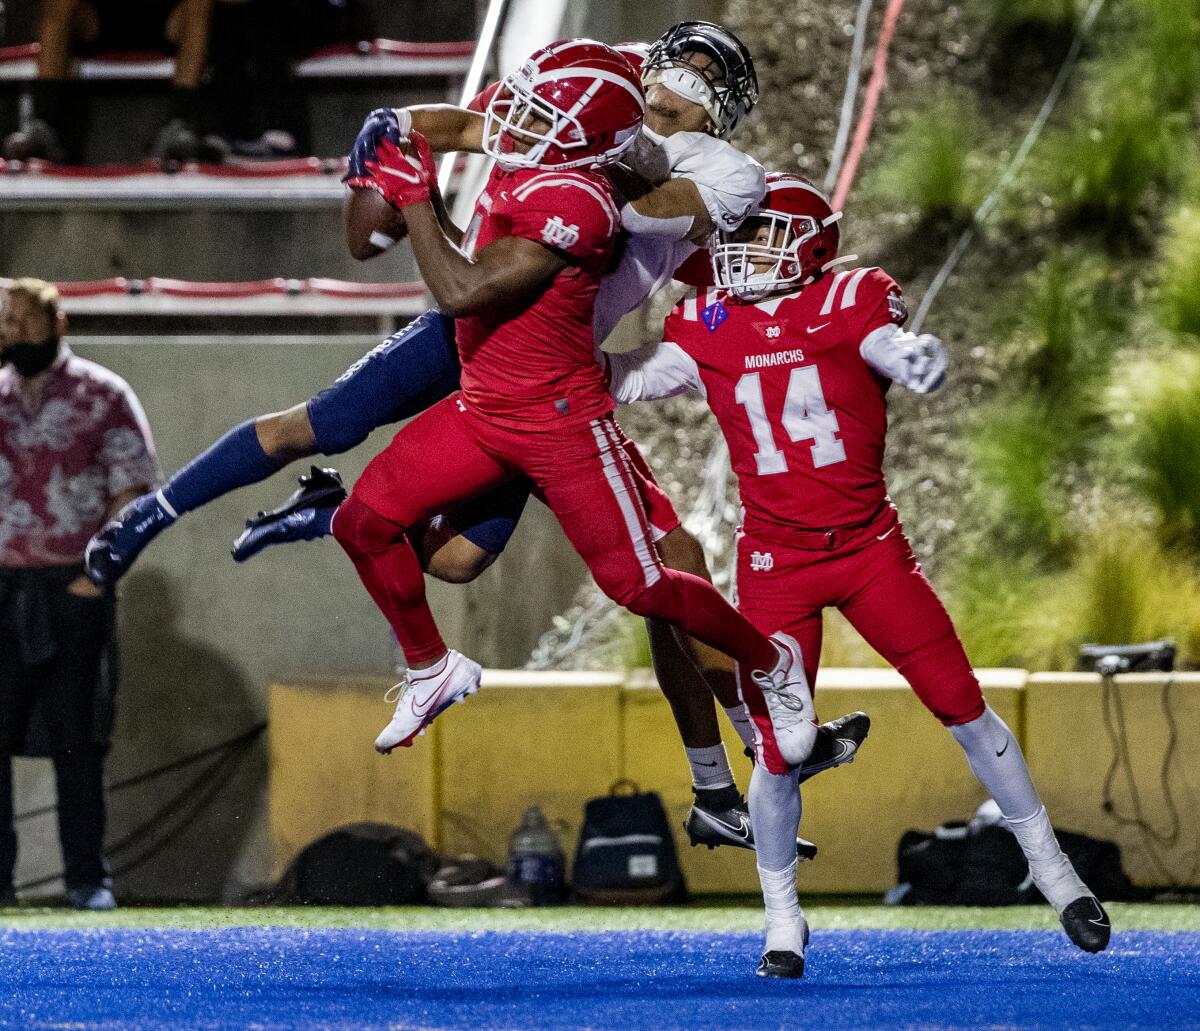 Mater Dei's Shu'yab Brinkley intercepts a pass in the end zone intended for St John Bosco's James Chedon.